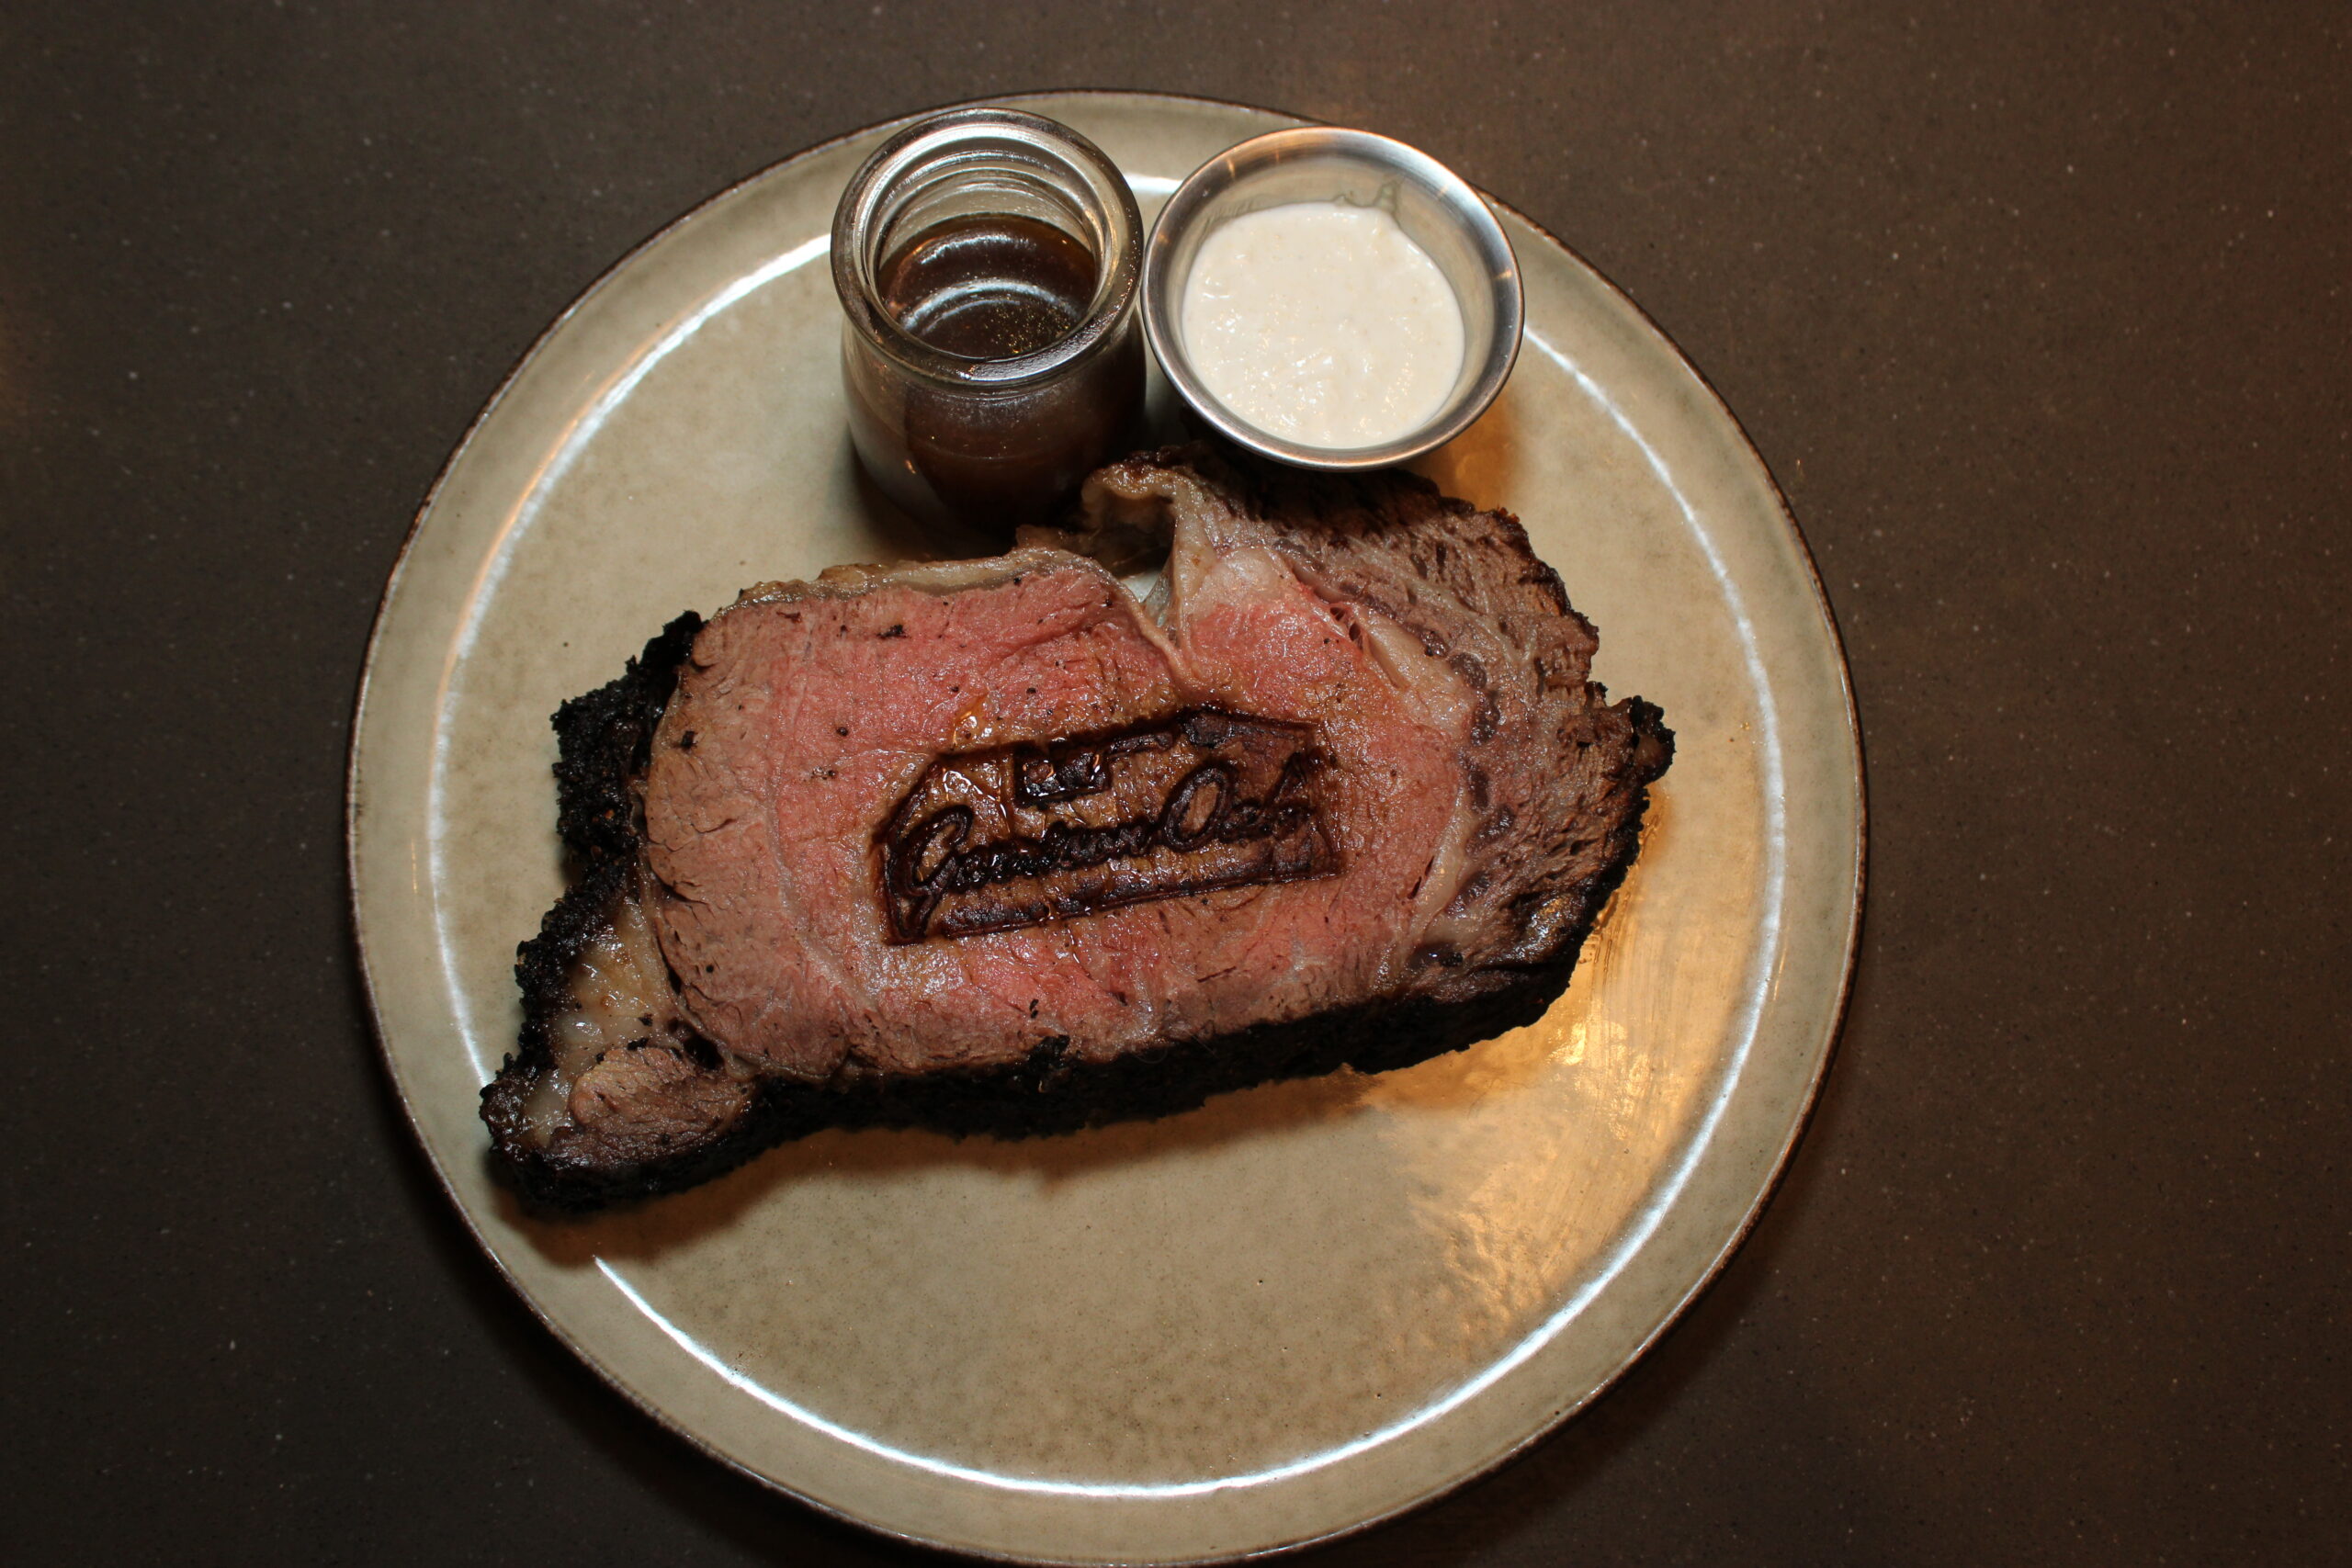 Image of King Cut Prime Rib with Au Jus and Horseradish Cream. The meat is branded with the "Garrison Oak" wordmark